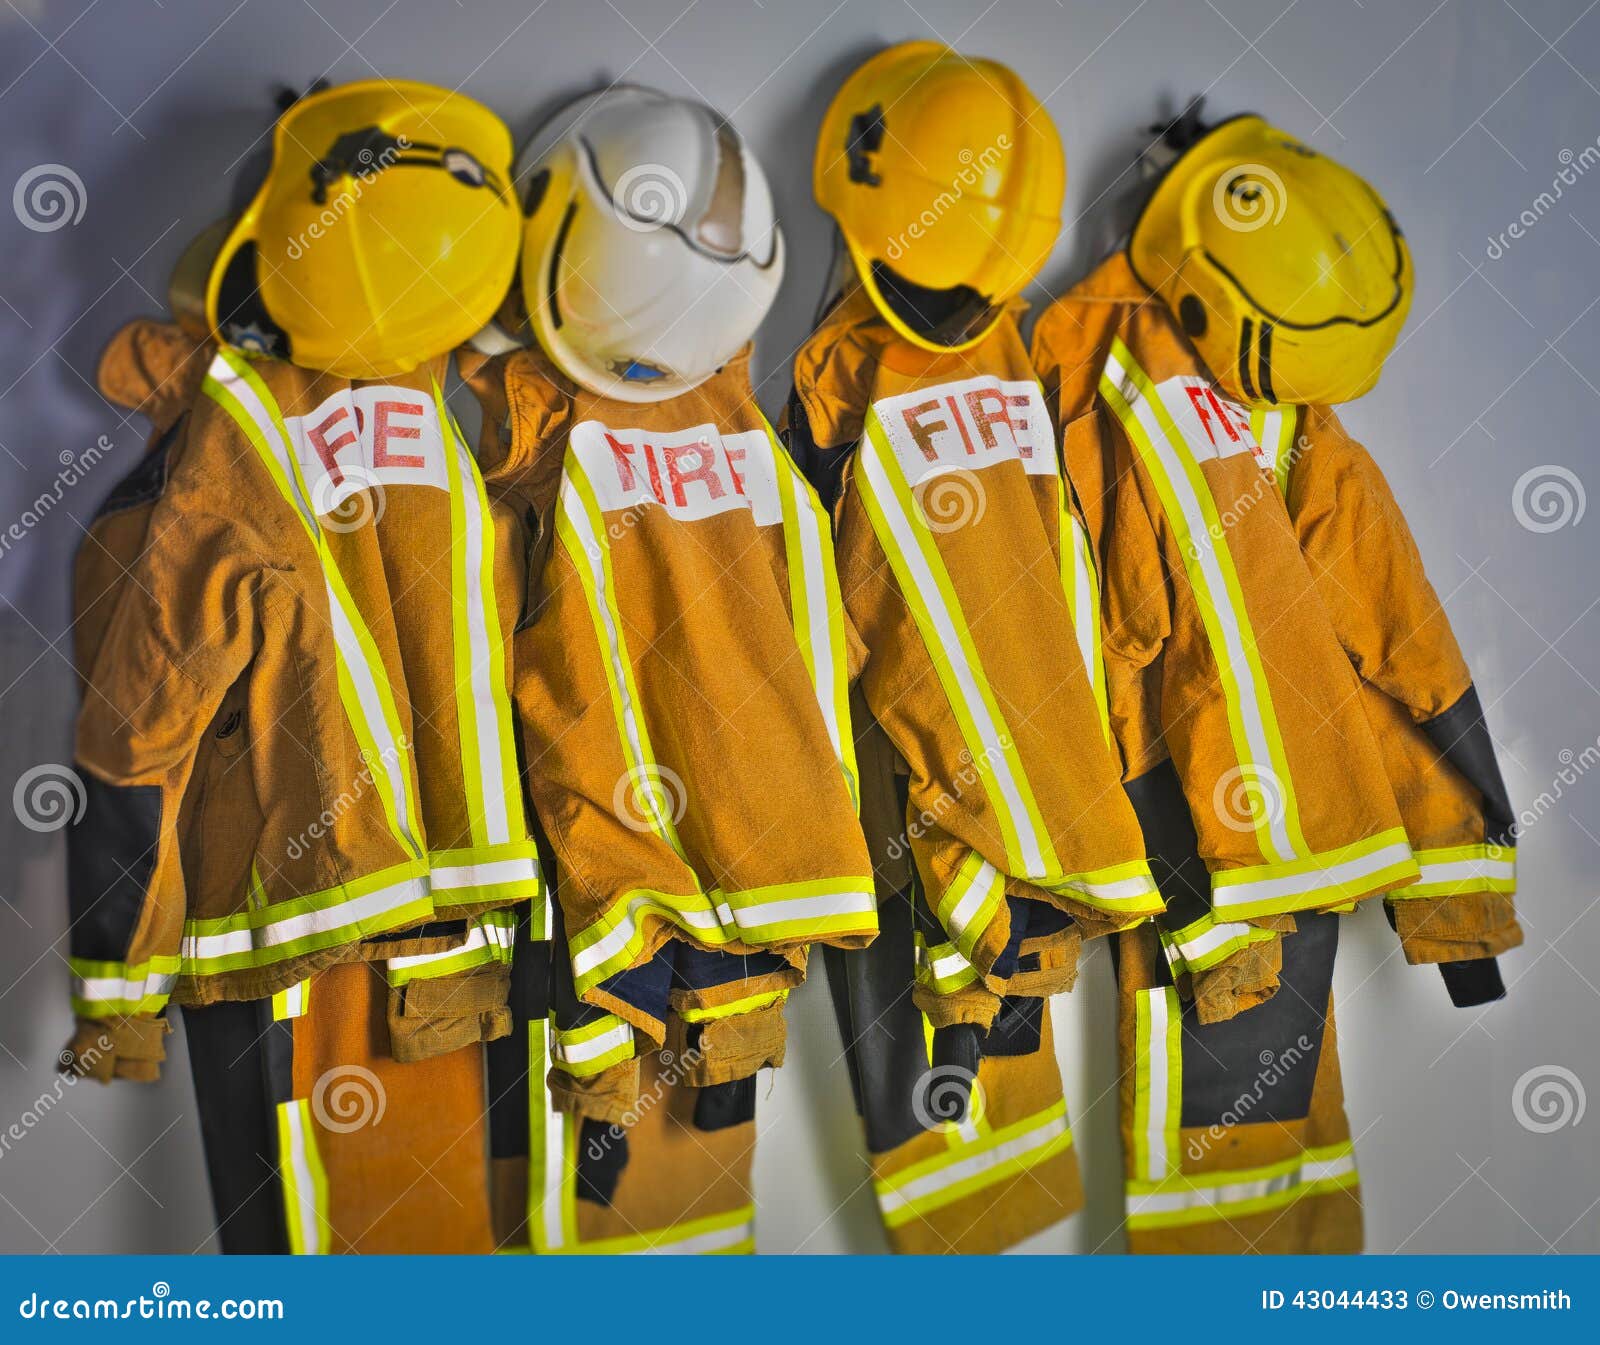 firefighters uniforms